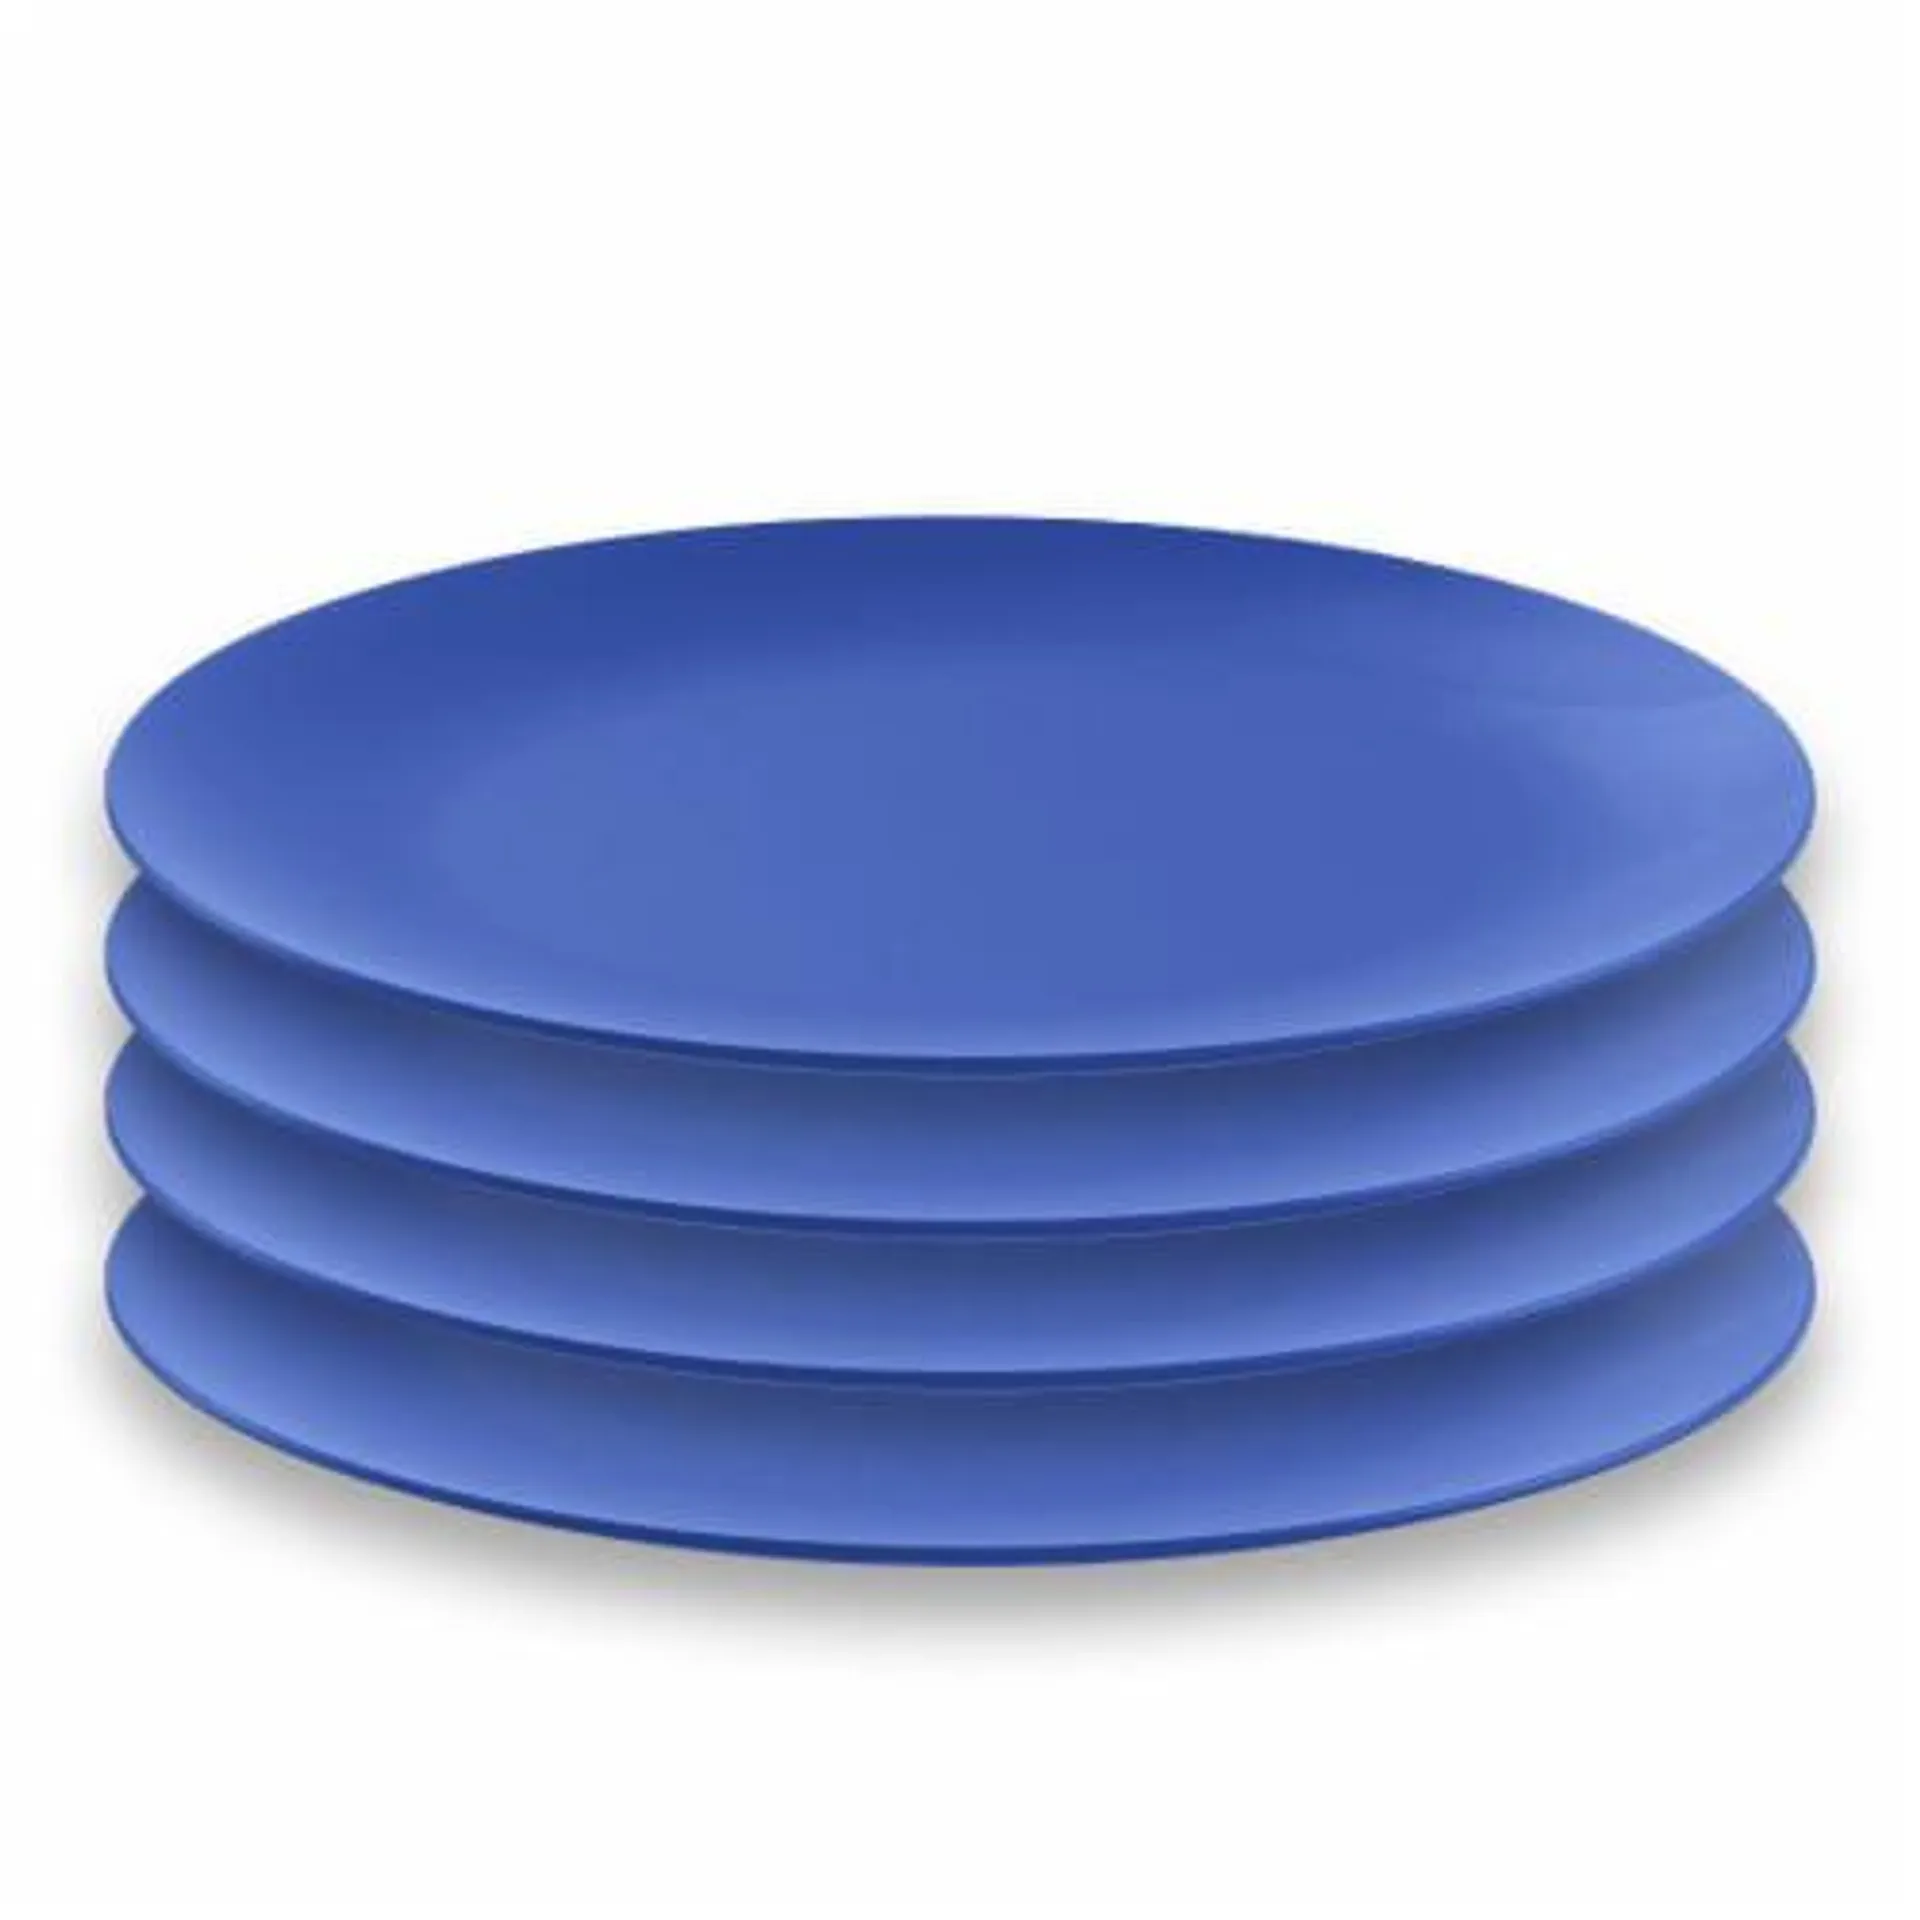 HD Designs Outdoors Dinner Plates - Royal